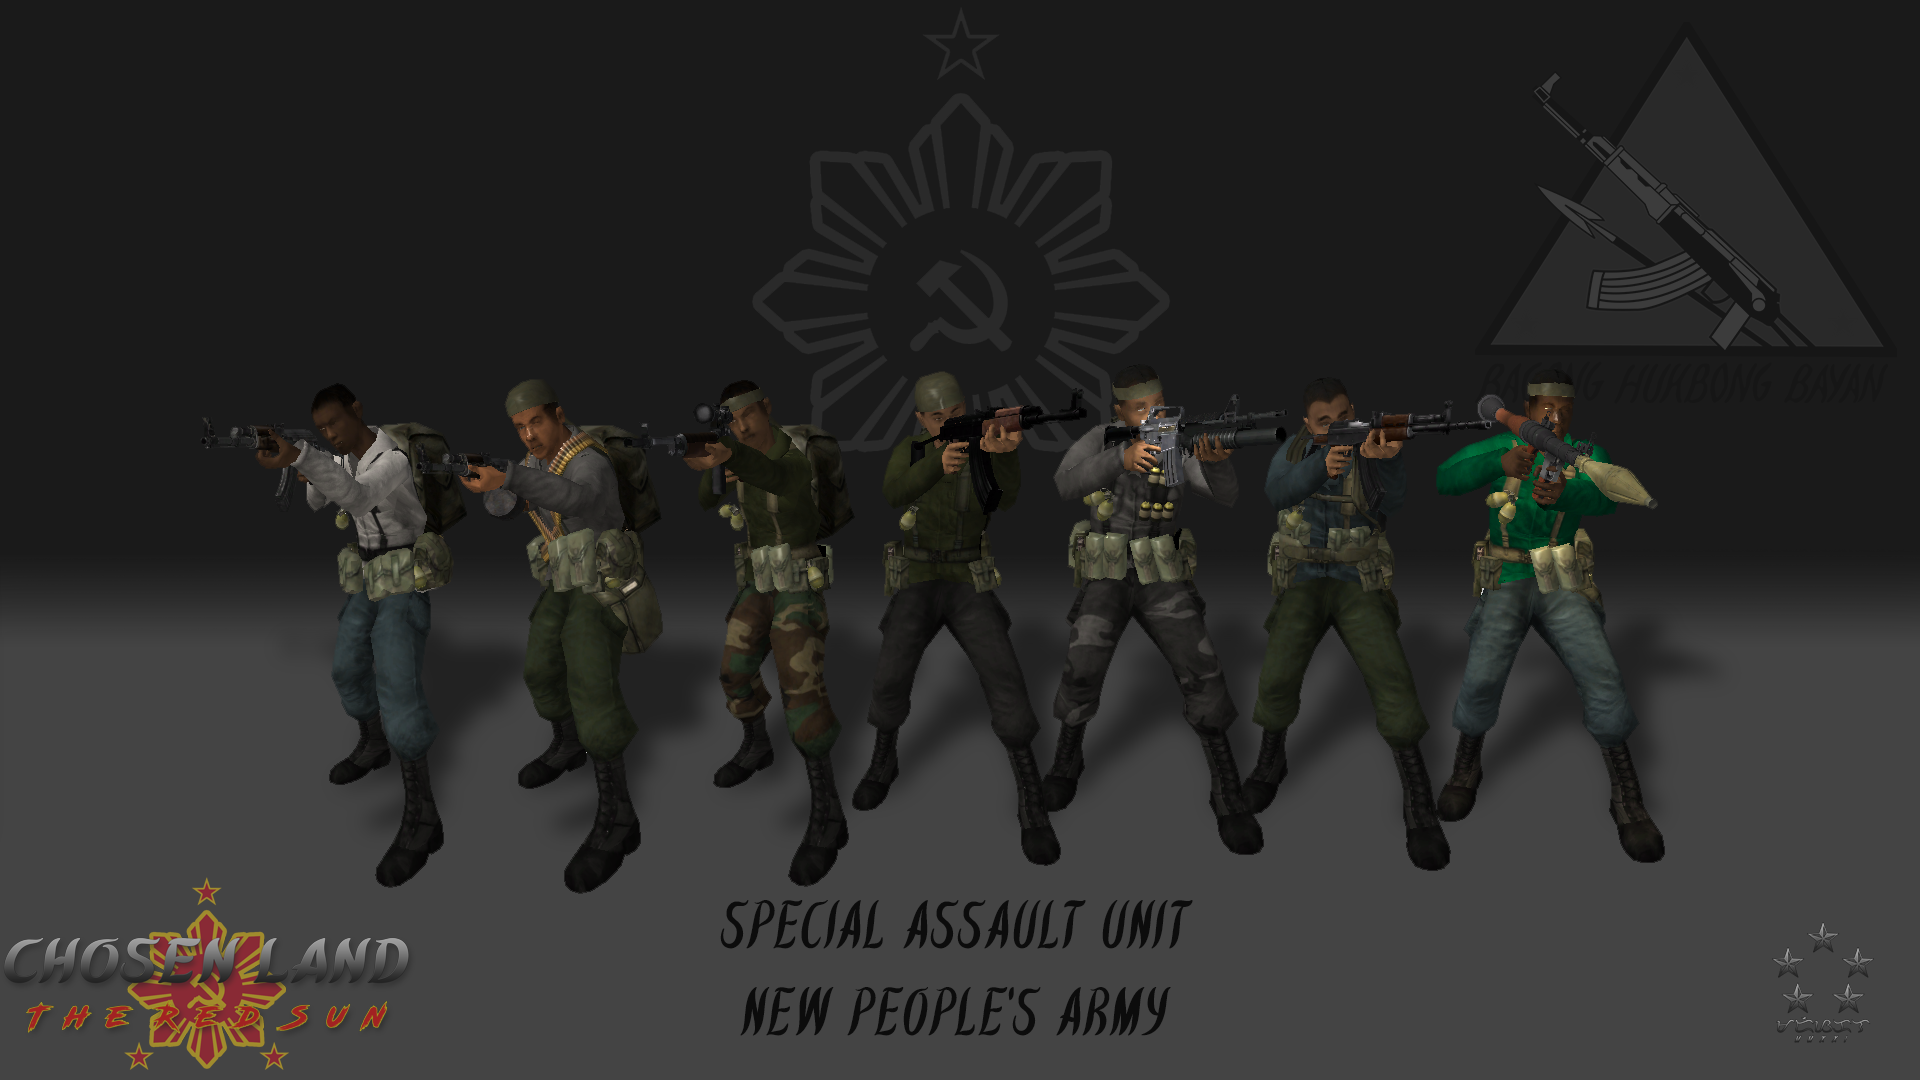 New Peoples Army - Special Assault Unit